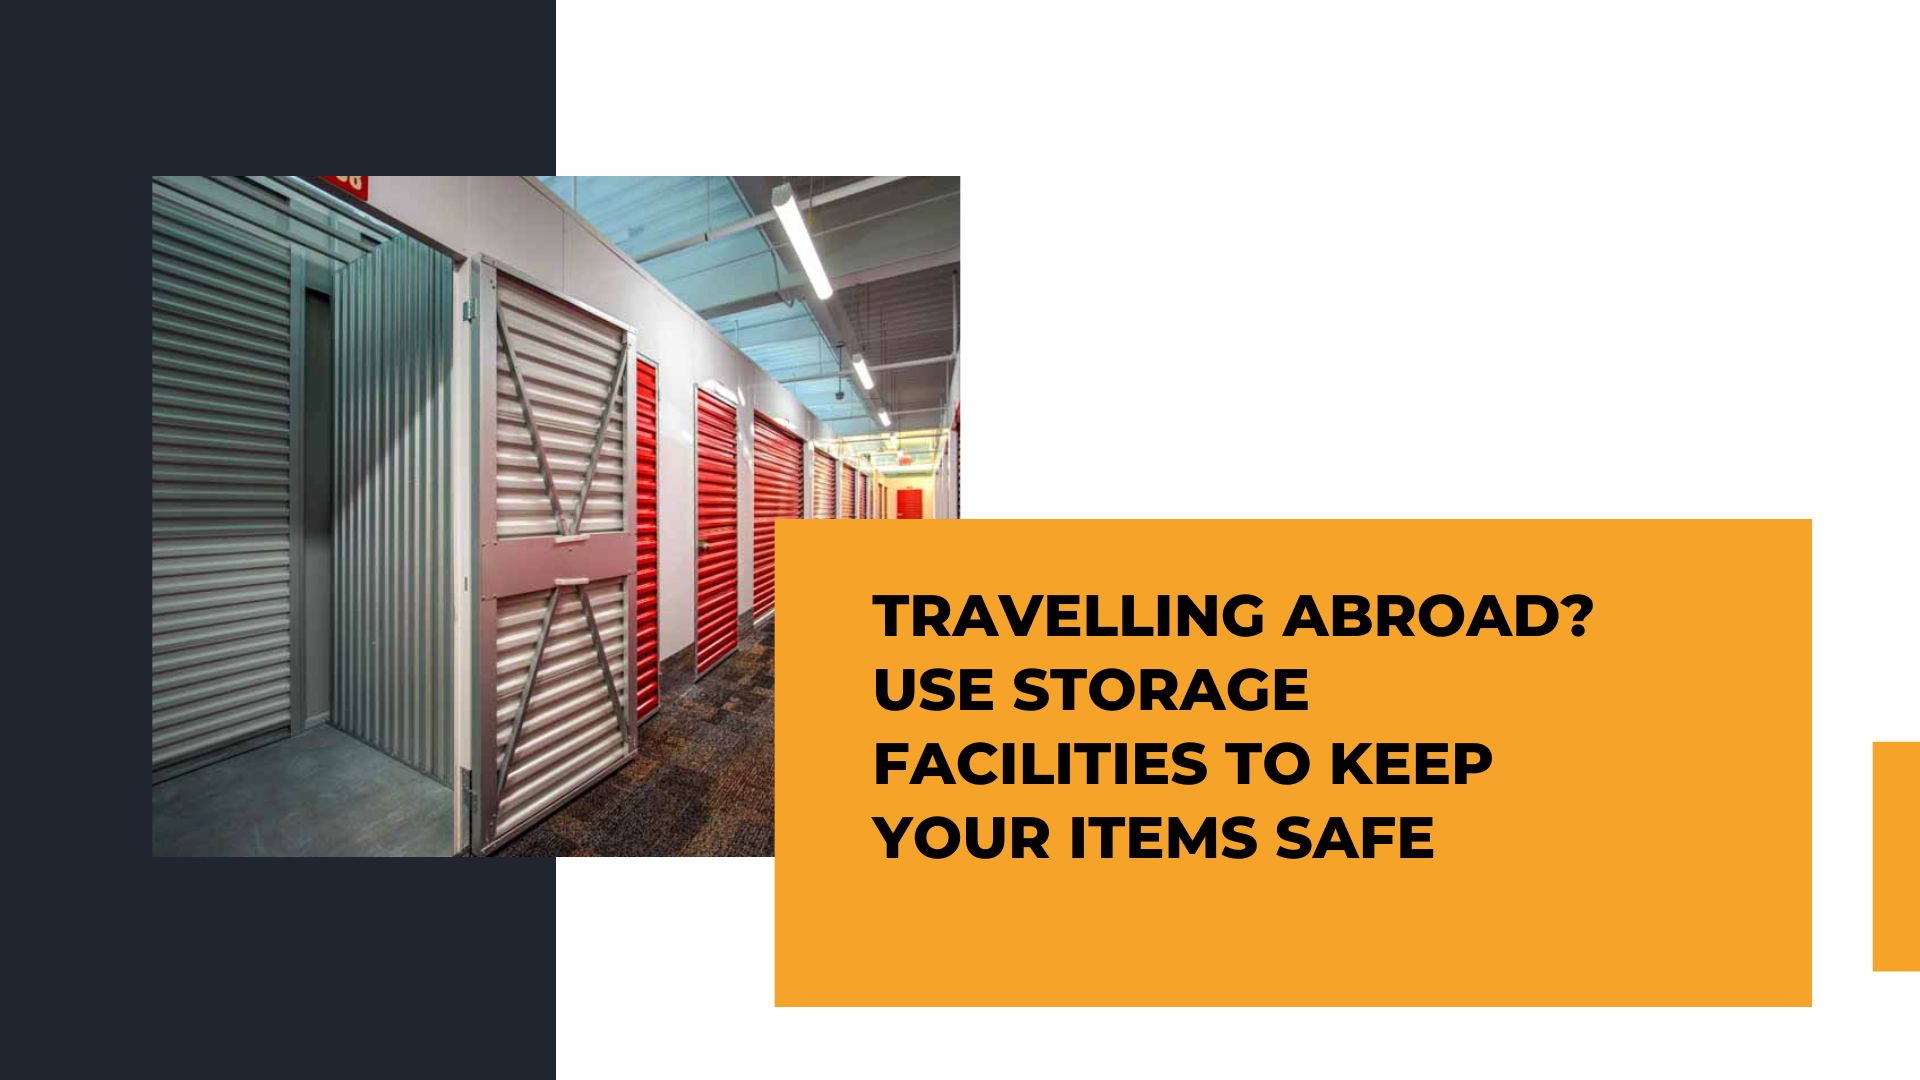 Use Storage Facilities to Keep Your Items Safe